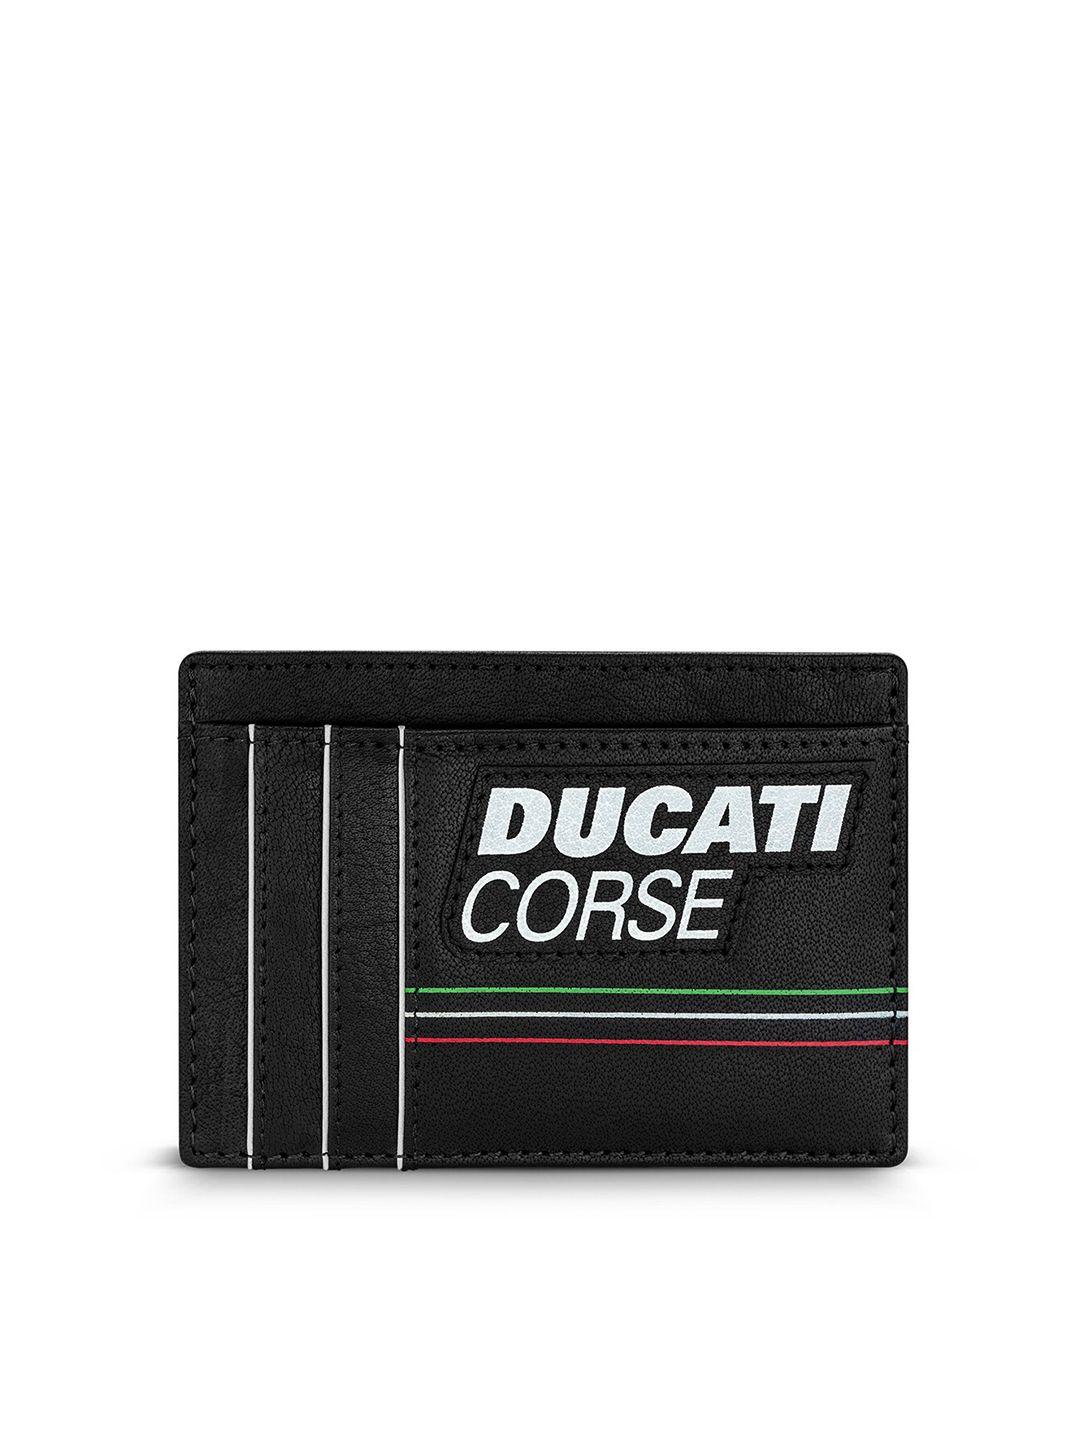 ducati corse men typography printed leather card holder